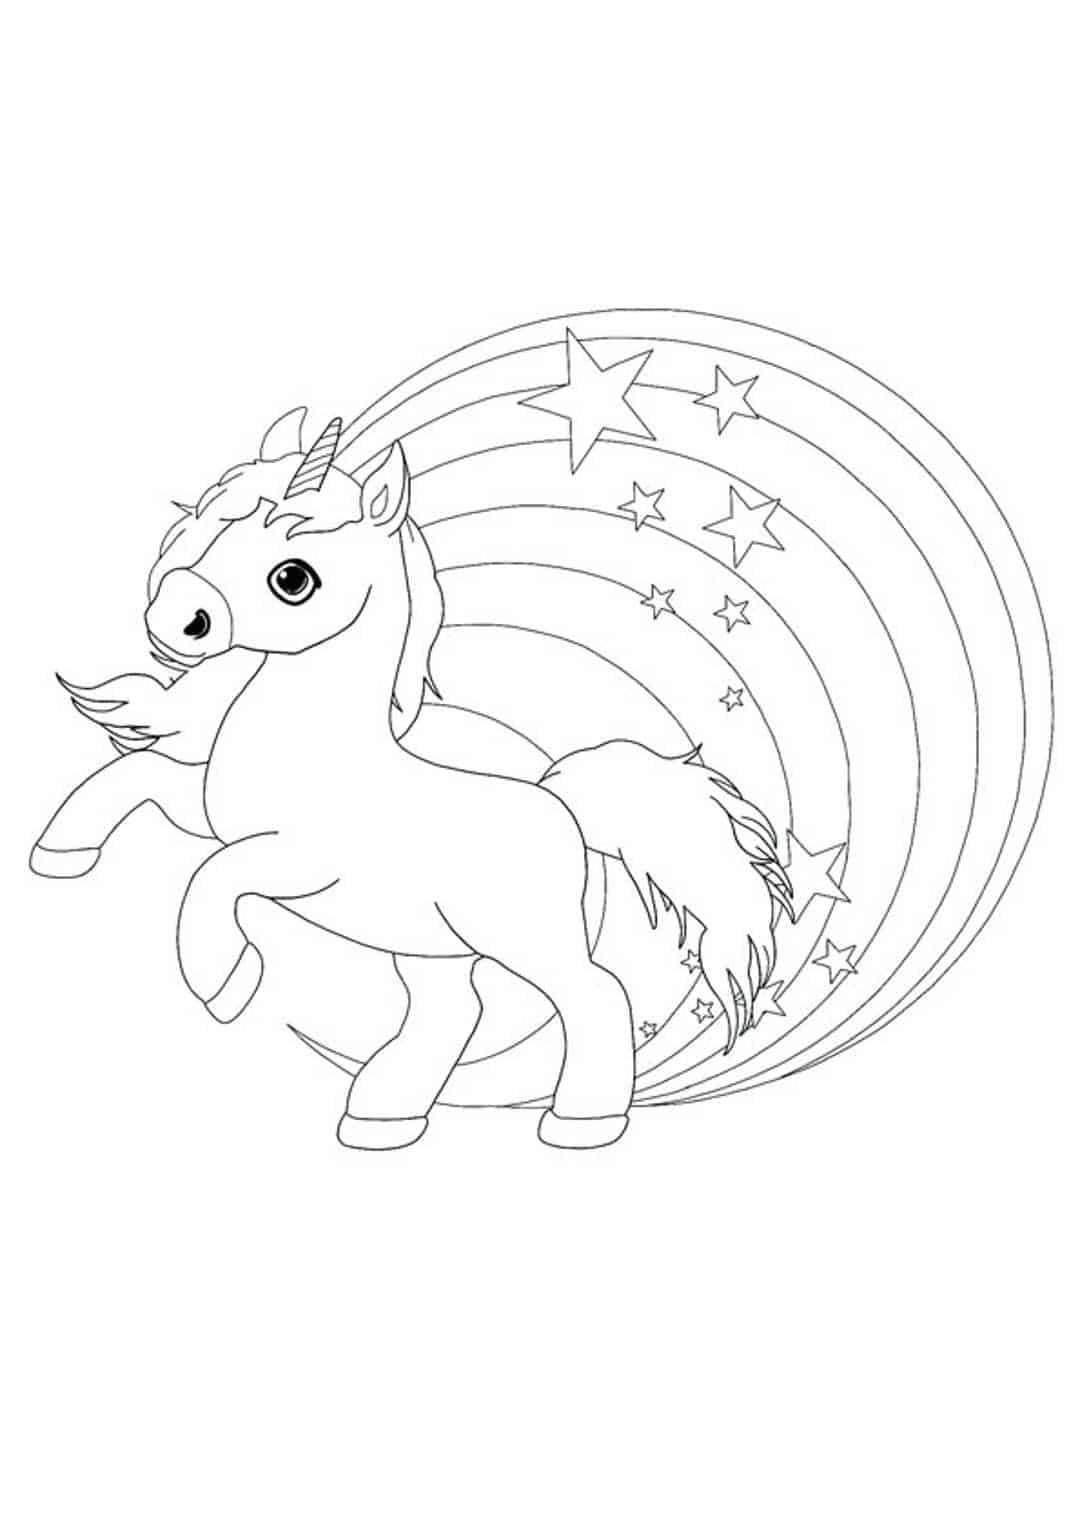 Little cute unicorn rainbow coloring page